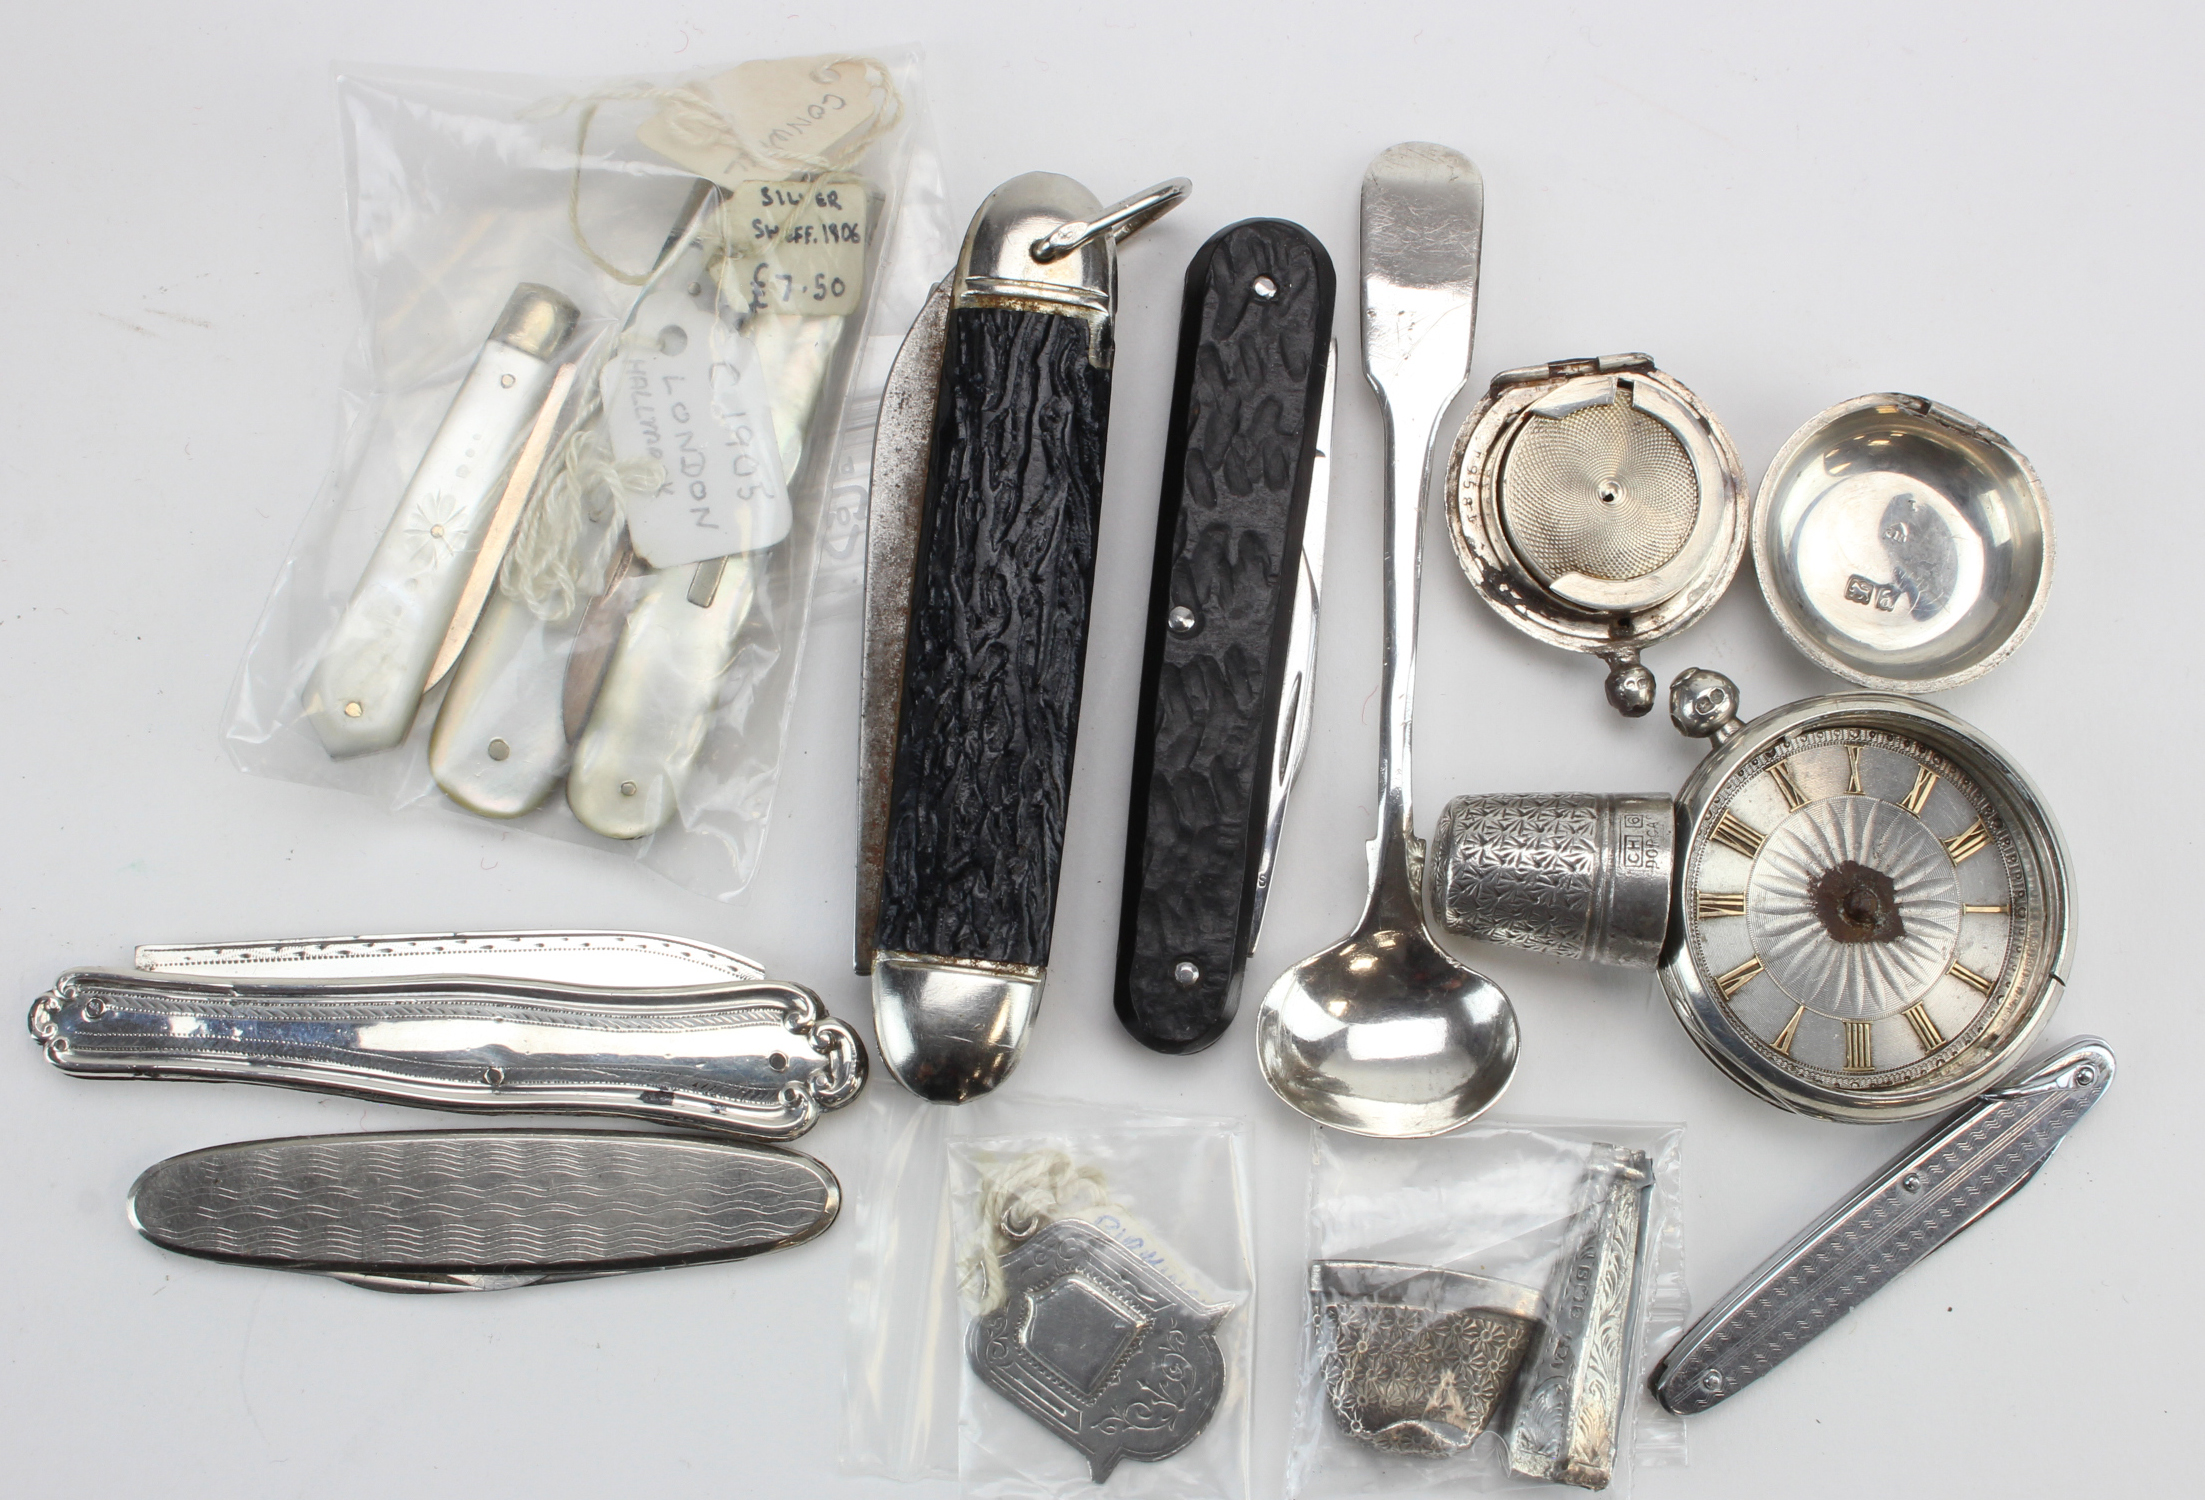 Mixed Silver. Includes Pocket watch case, sovereign holder (broken), various fruit knives etc.